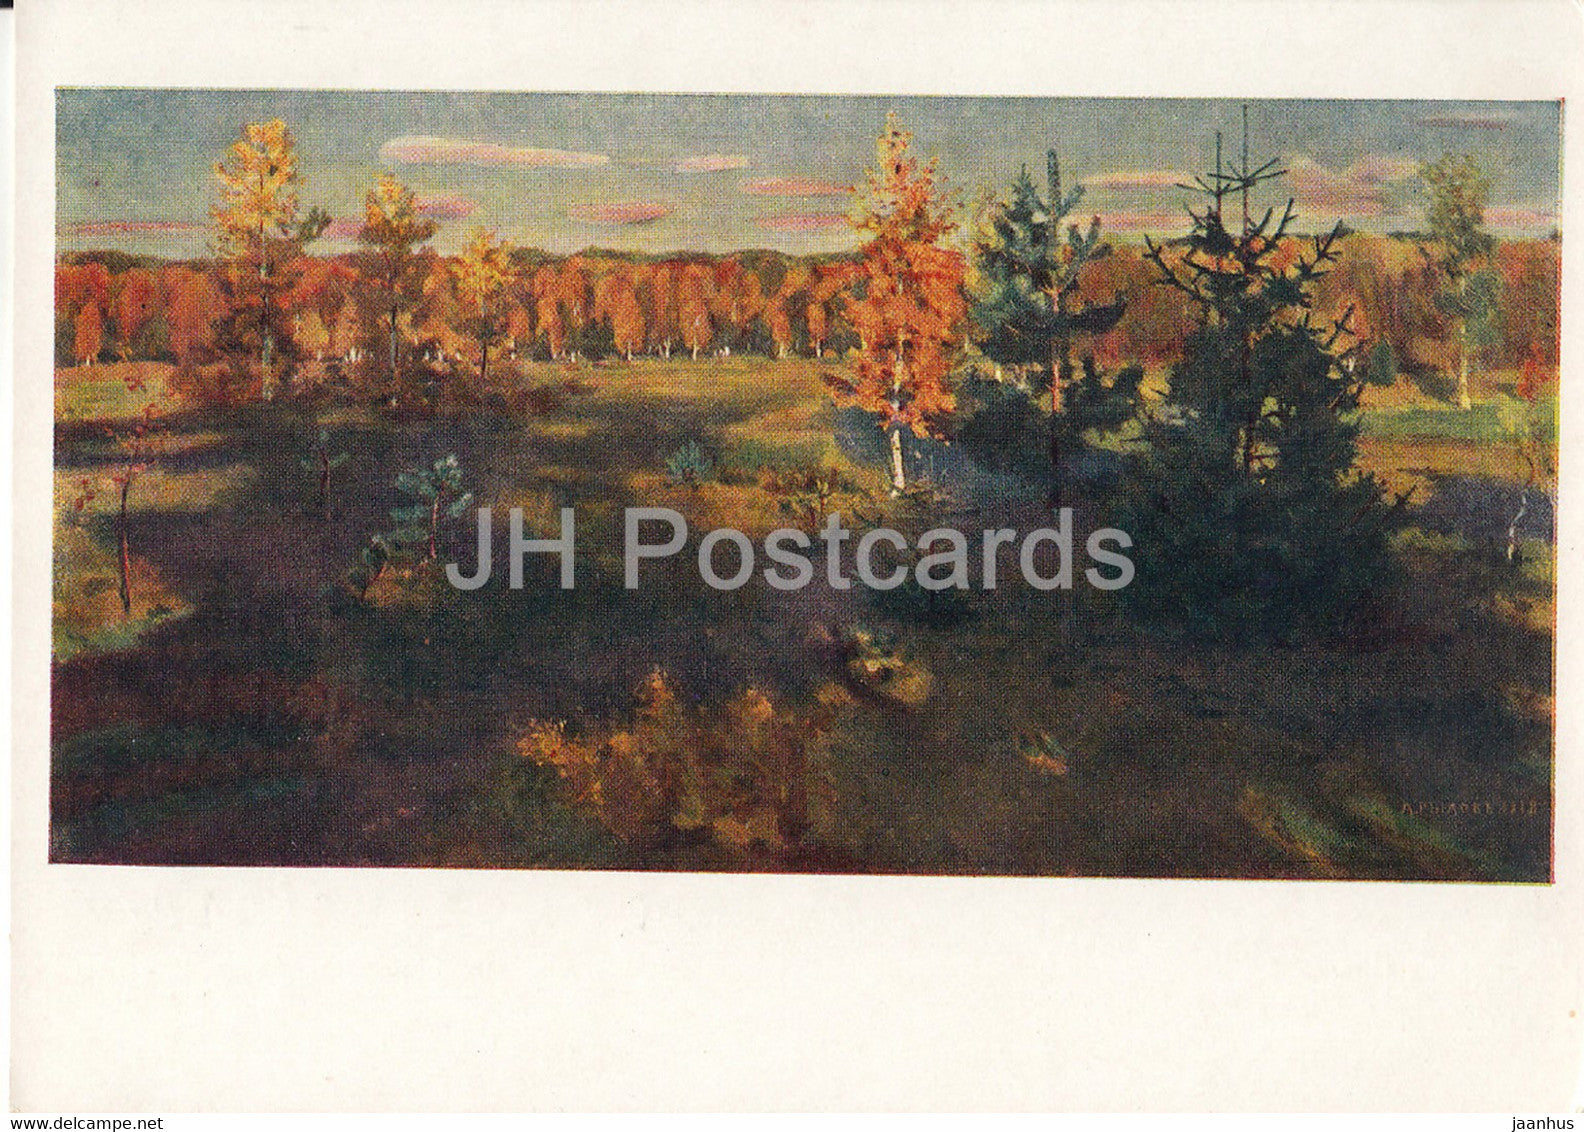 painting by A. Rylov - Crimson time - Russian art - 1961 - Russia USSR - unused - JH Postcards